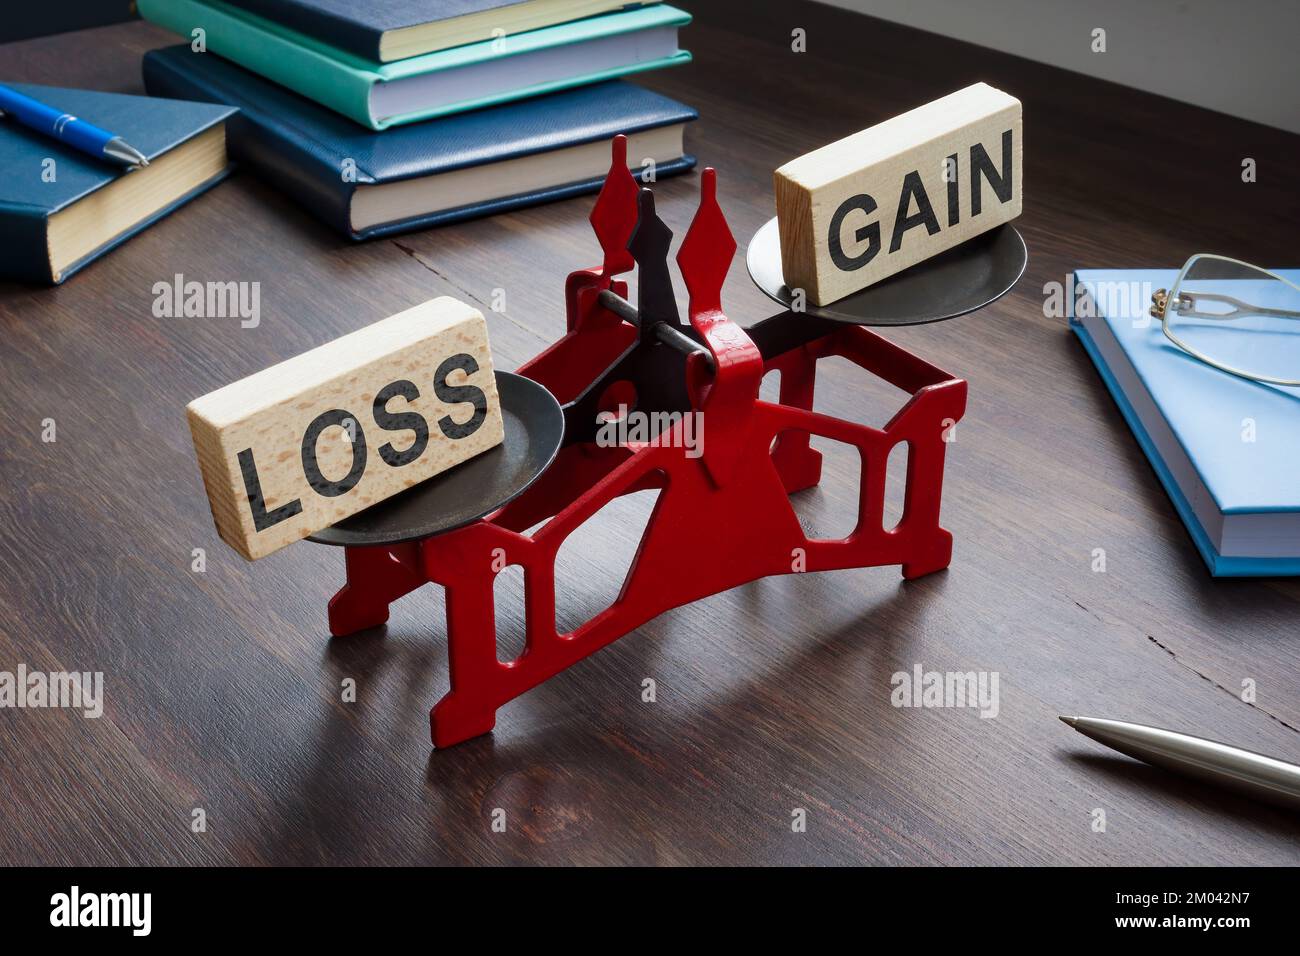 Small scales with inscriptions loss and gain on the table. Loss Aversion Bias concept. Stock Photo